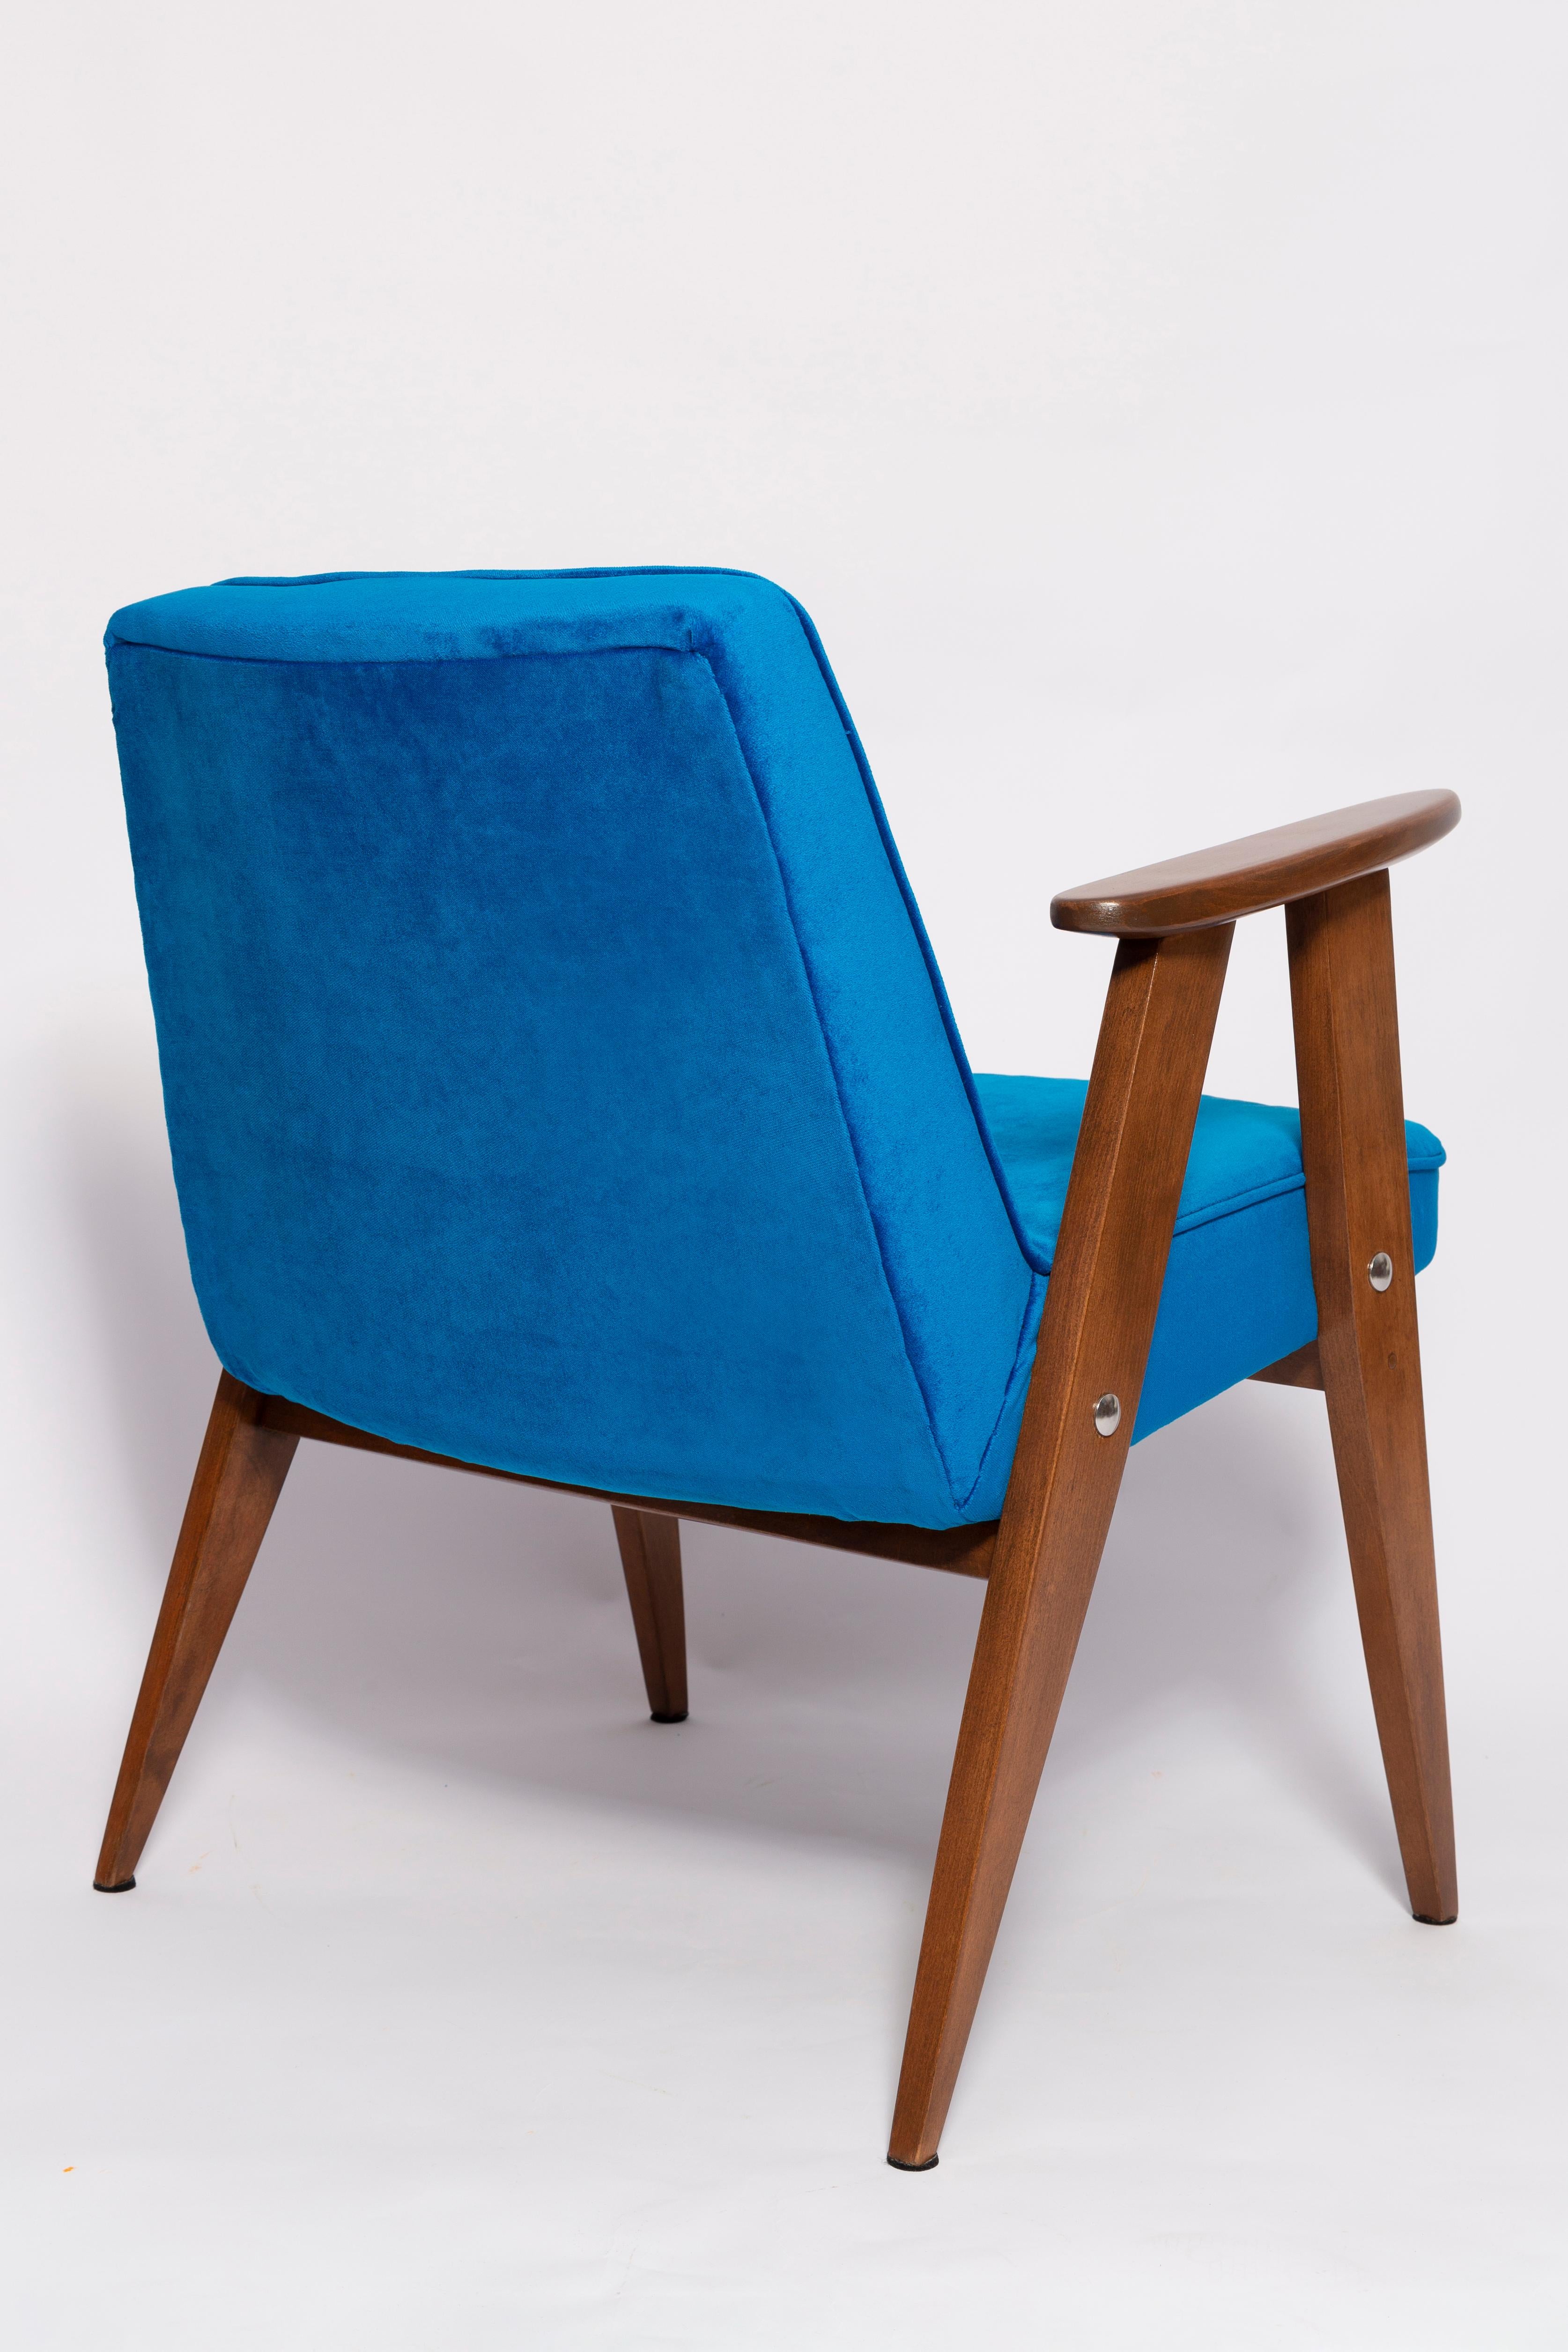 Textile Pair of Mid-Century 366 Armchairs, Pink and Blue, by Chierowski Europe, 1960s For Sale